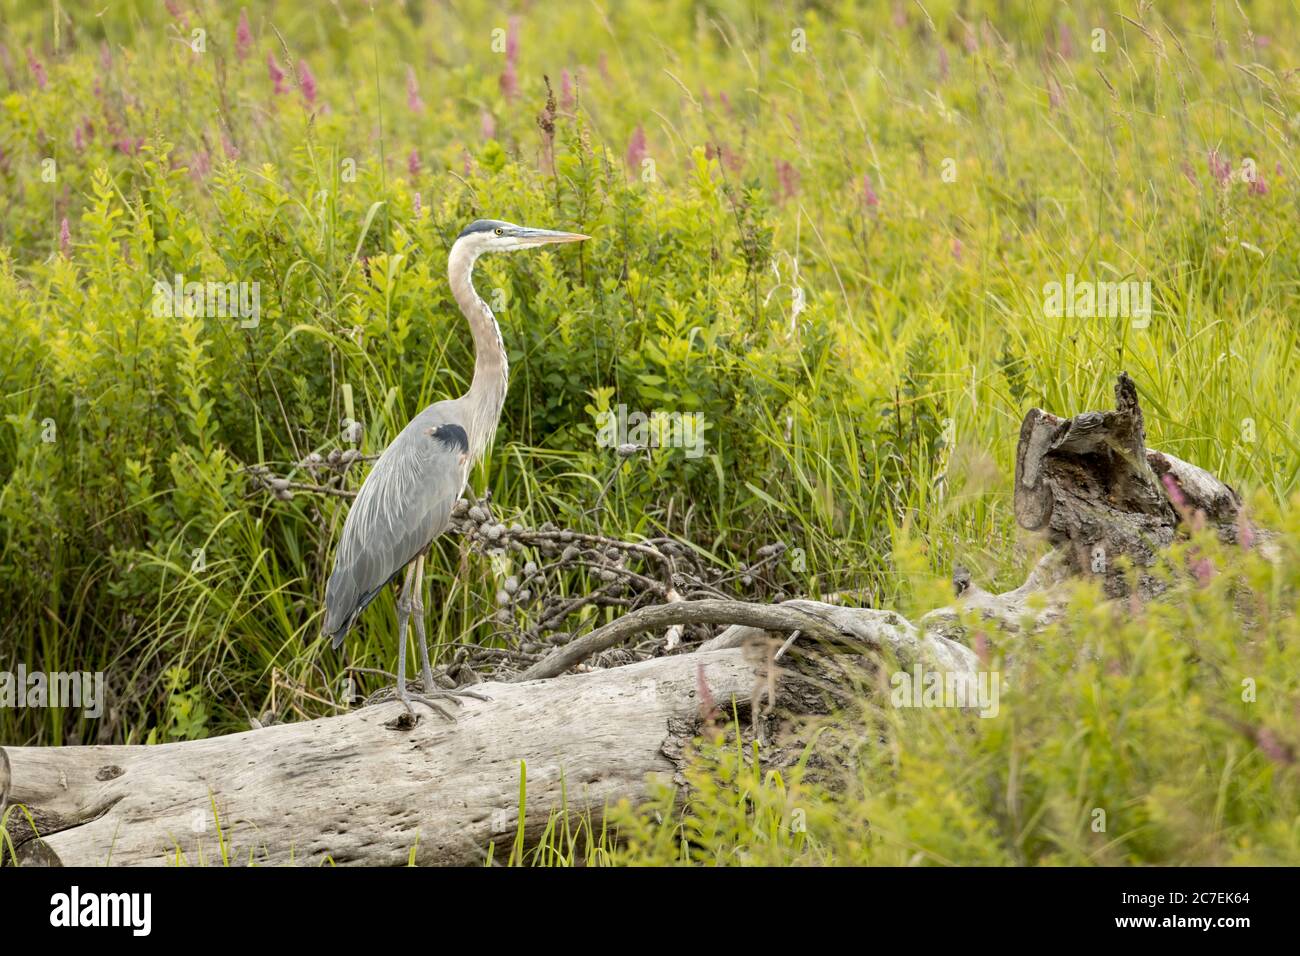 A great blue heron stands on an old fallen log in Stock Photo